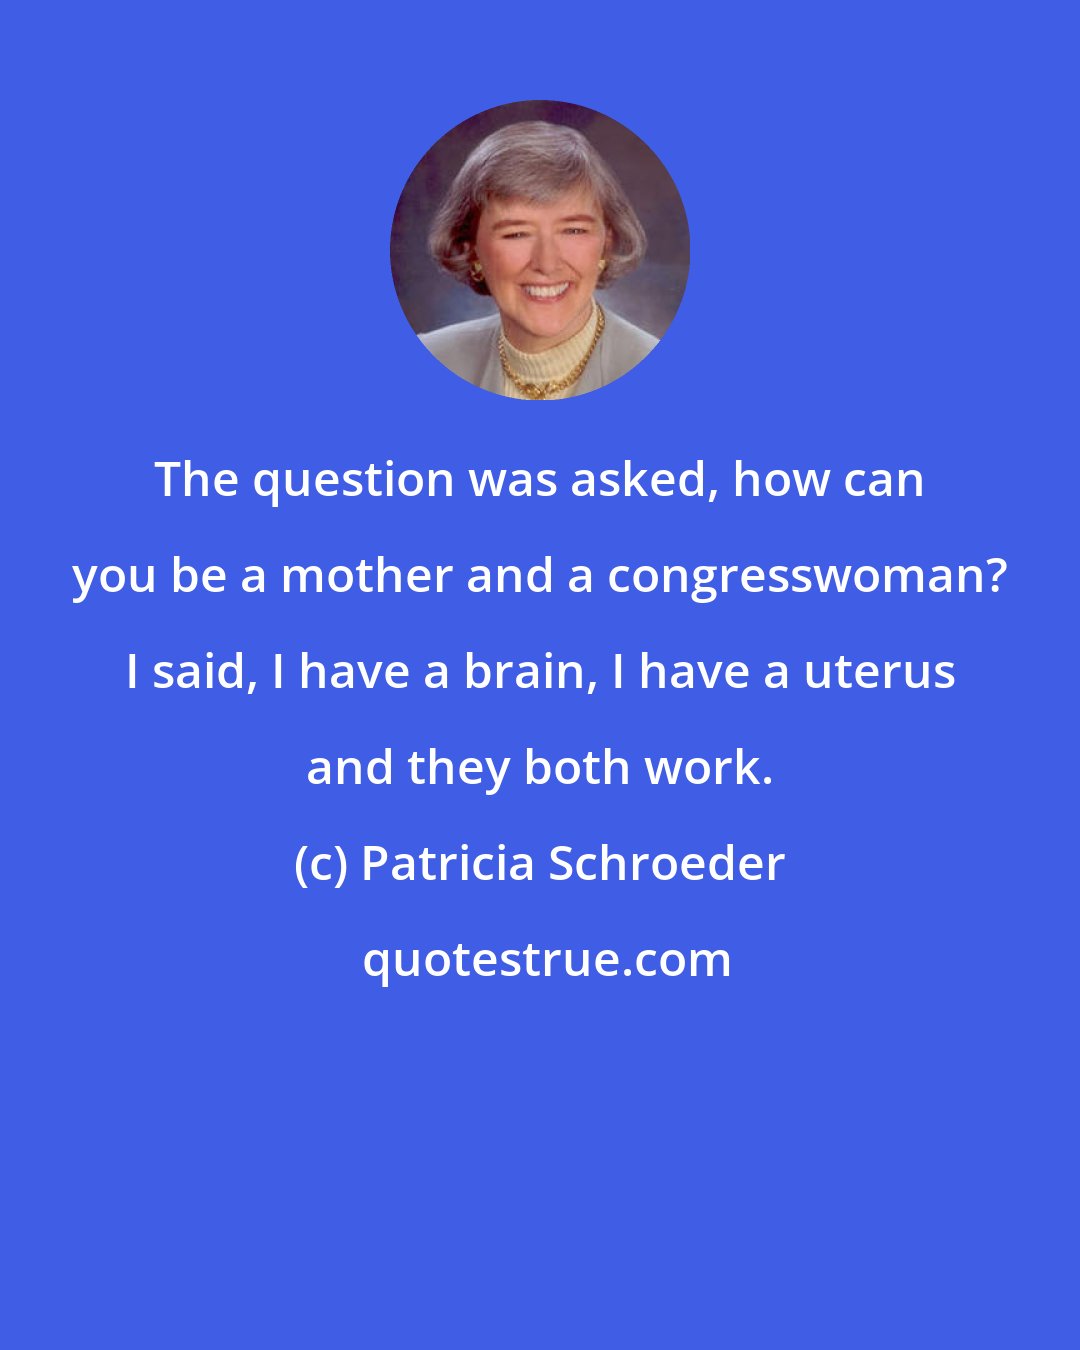 Patricia Schroeder: The question was asked, how can you be a mother and a congresswoman? I said, I have a brain, I have a uterus and they both work.